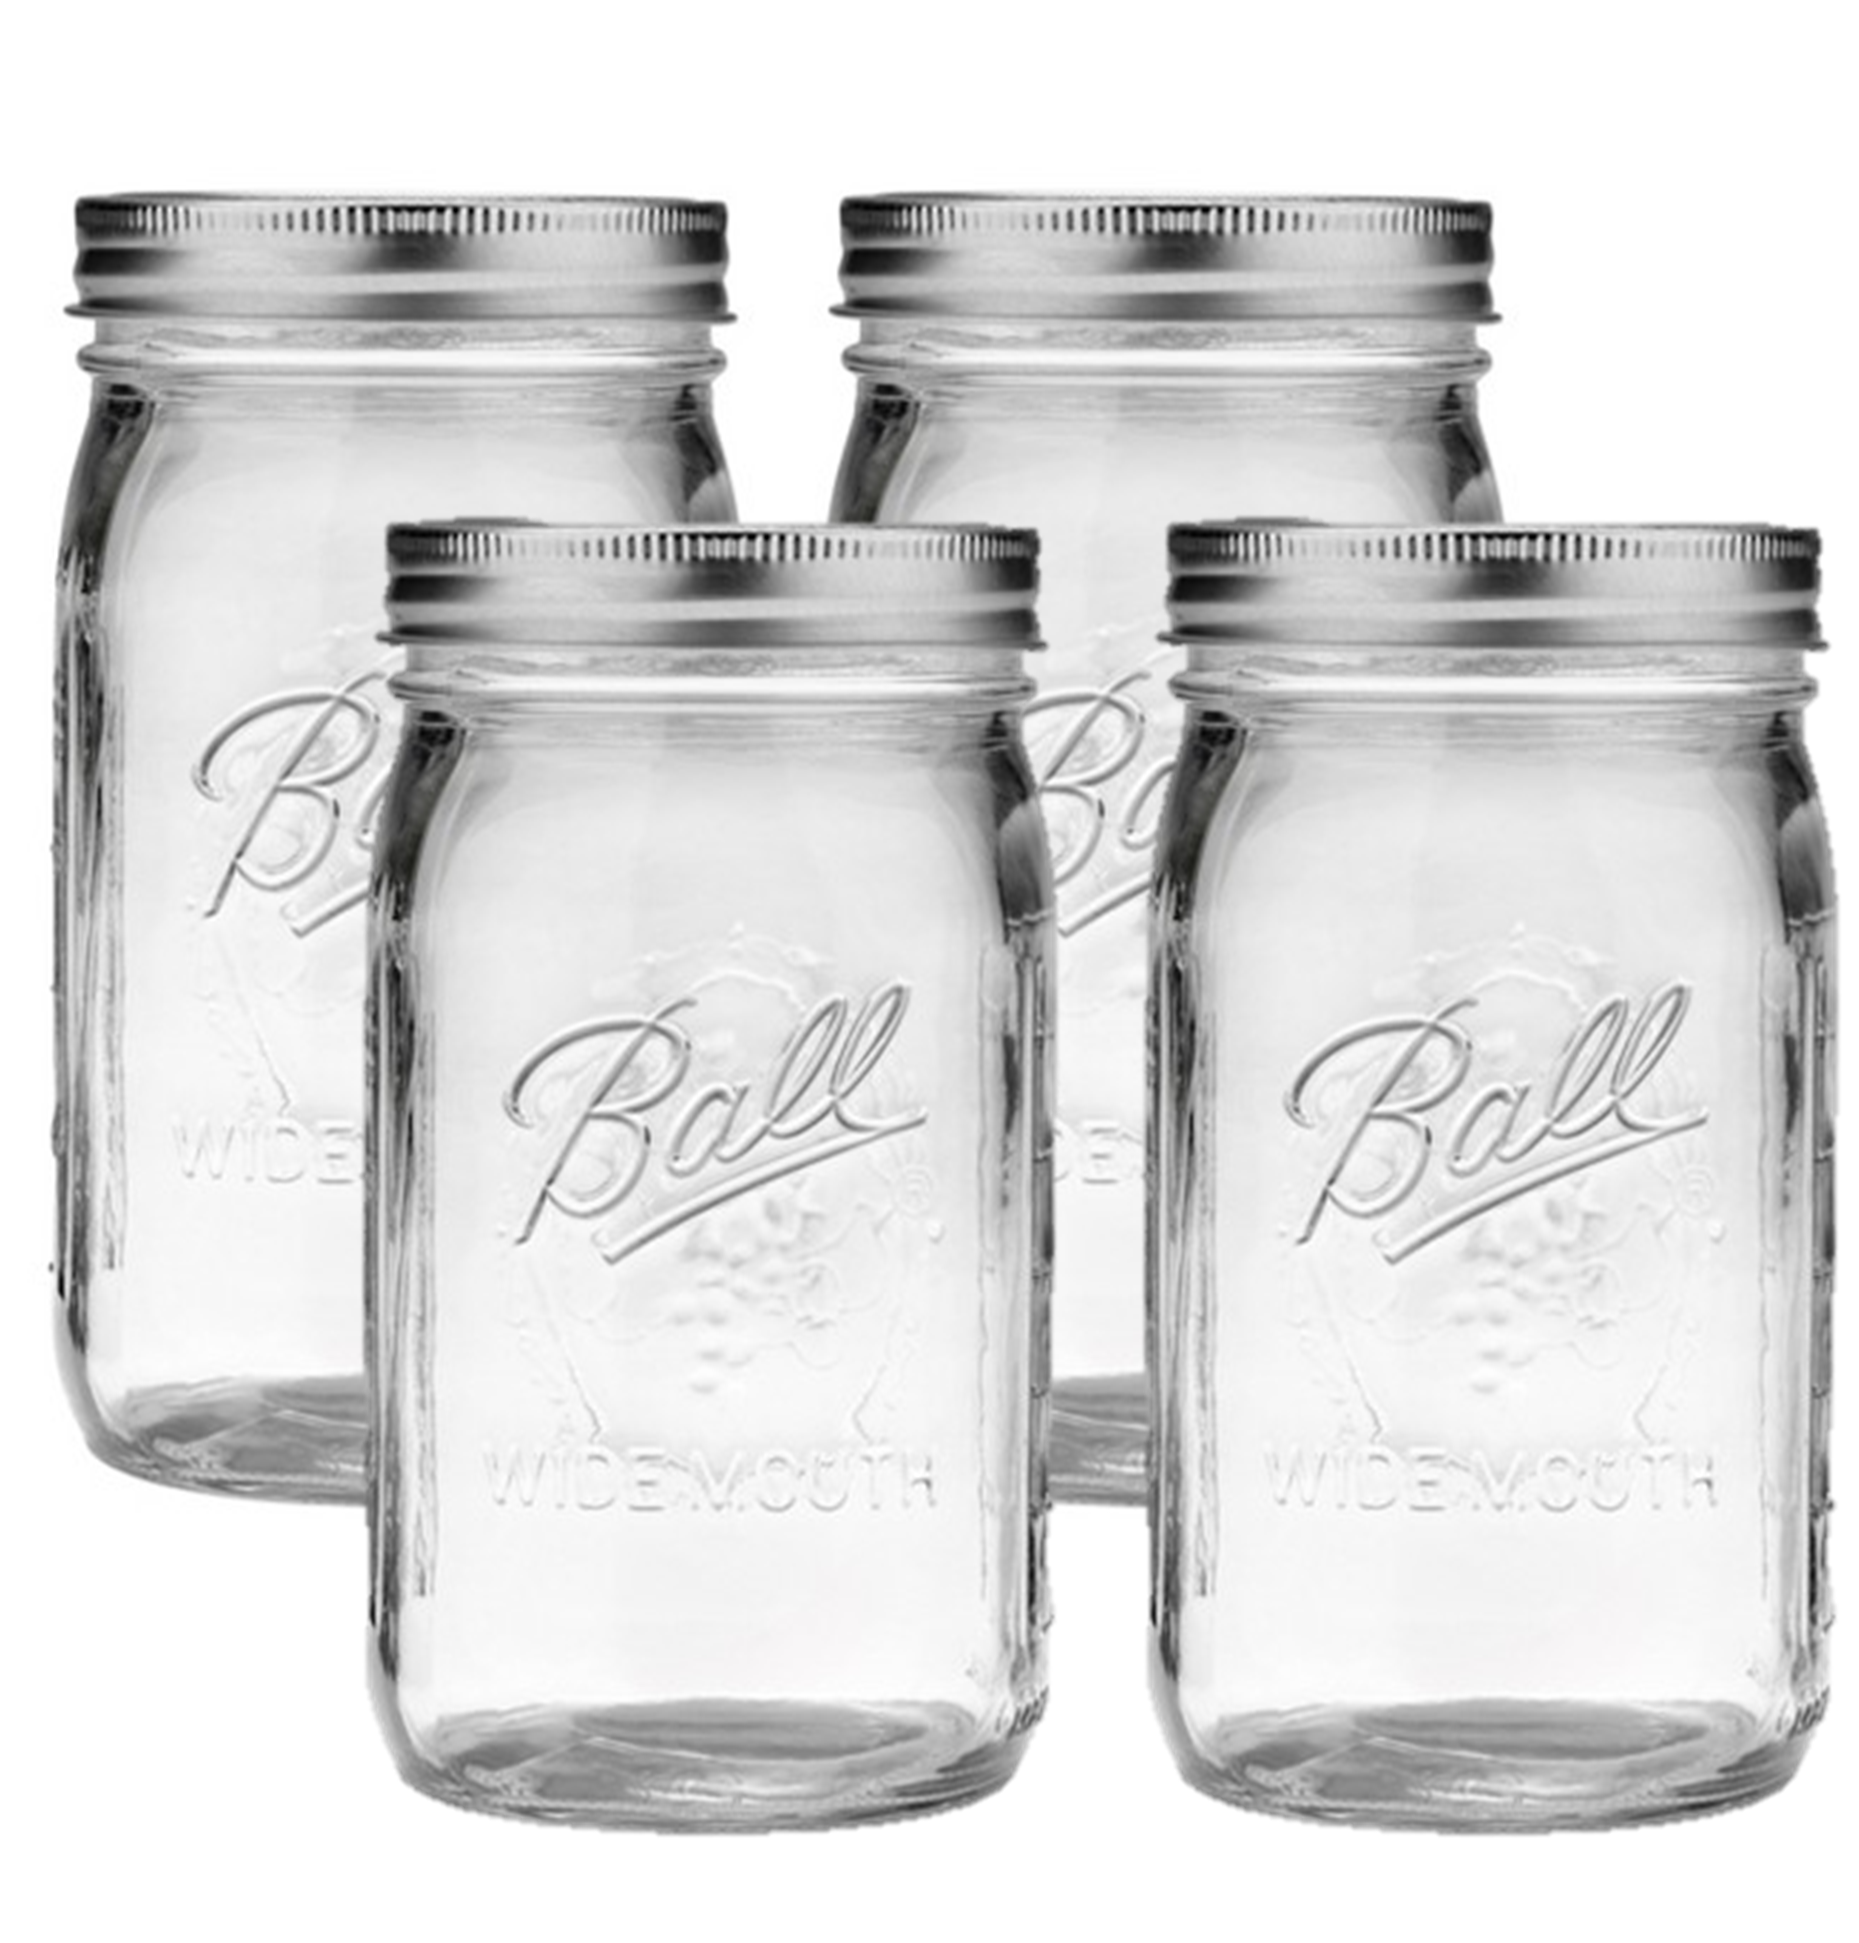 Ball Glass Mason Jar with Lid & Band, Wide Mouth, 32 Ounces, 4 Count ...